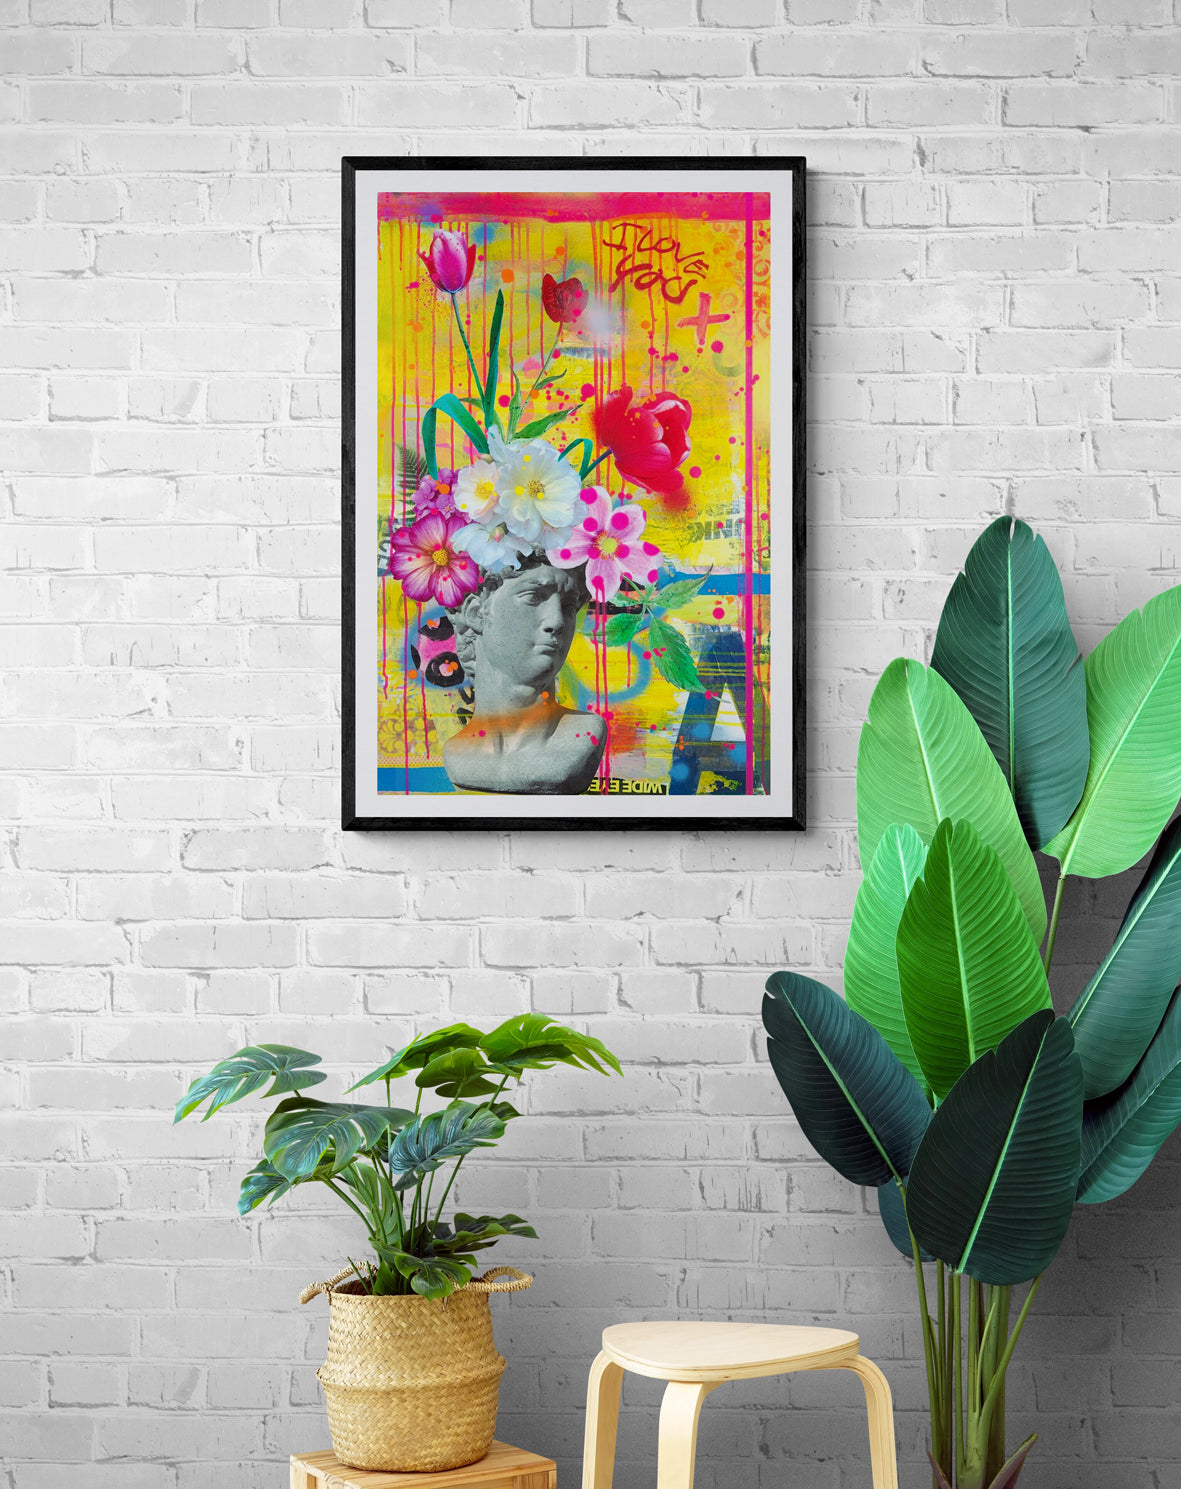 Jules Wild- All For One, Limited edition, Print, Flowers, Floral, Artist, Art - TAP Galleries 